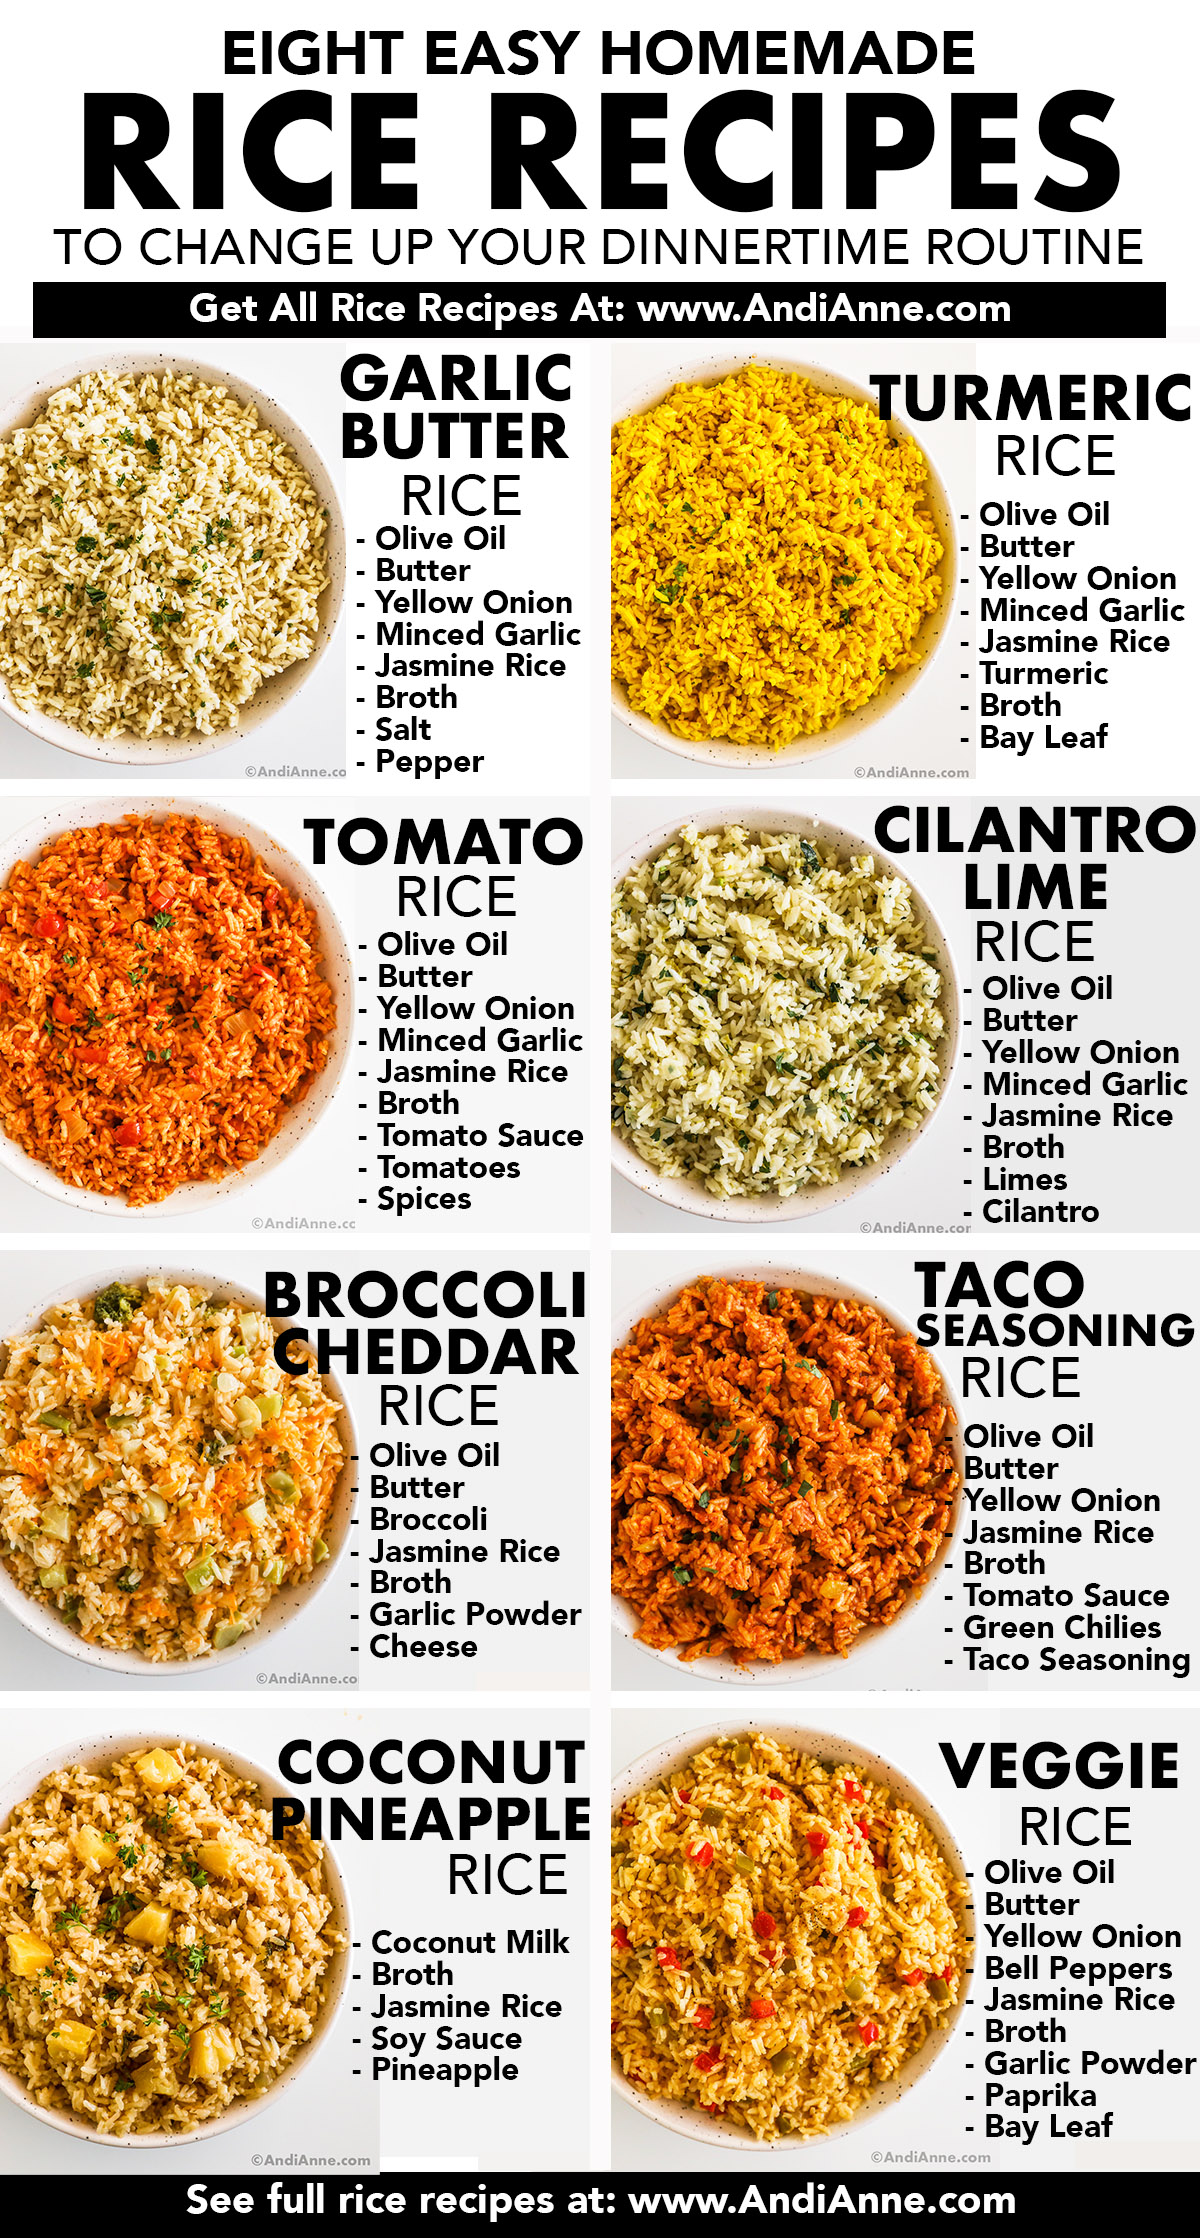 A large list of 8 different rice recipes with images of each in a bowl and text of rice name and rice ingredients beside each one. Flavors include garlic butter, turmeric, tomato, cilantro lime, broccoli cheddar, taco rice, coconut pineapple, and cajun rice.